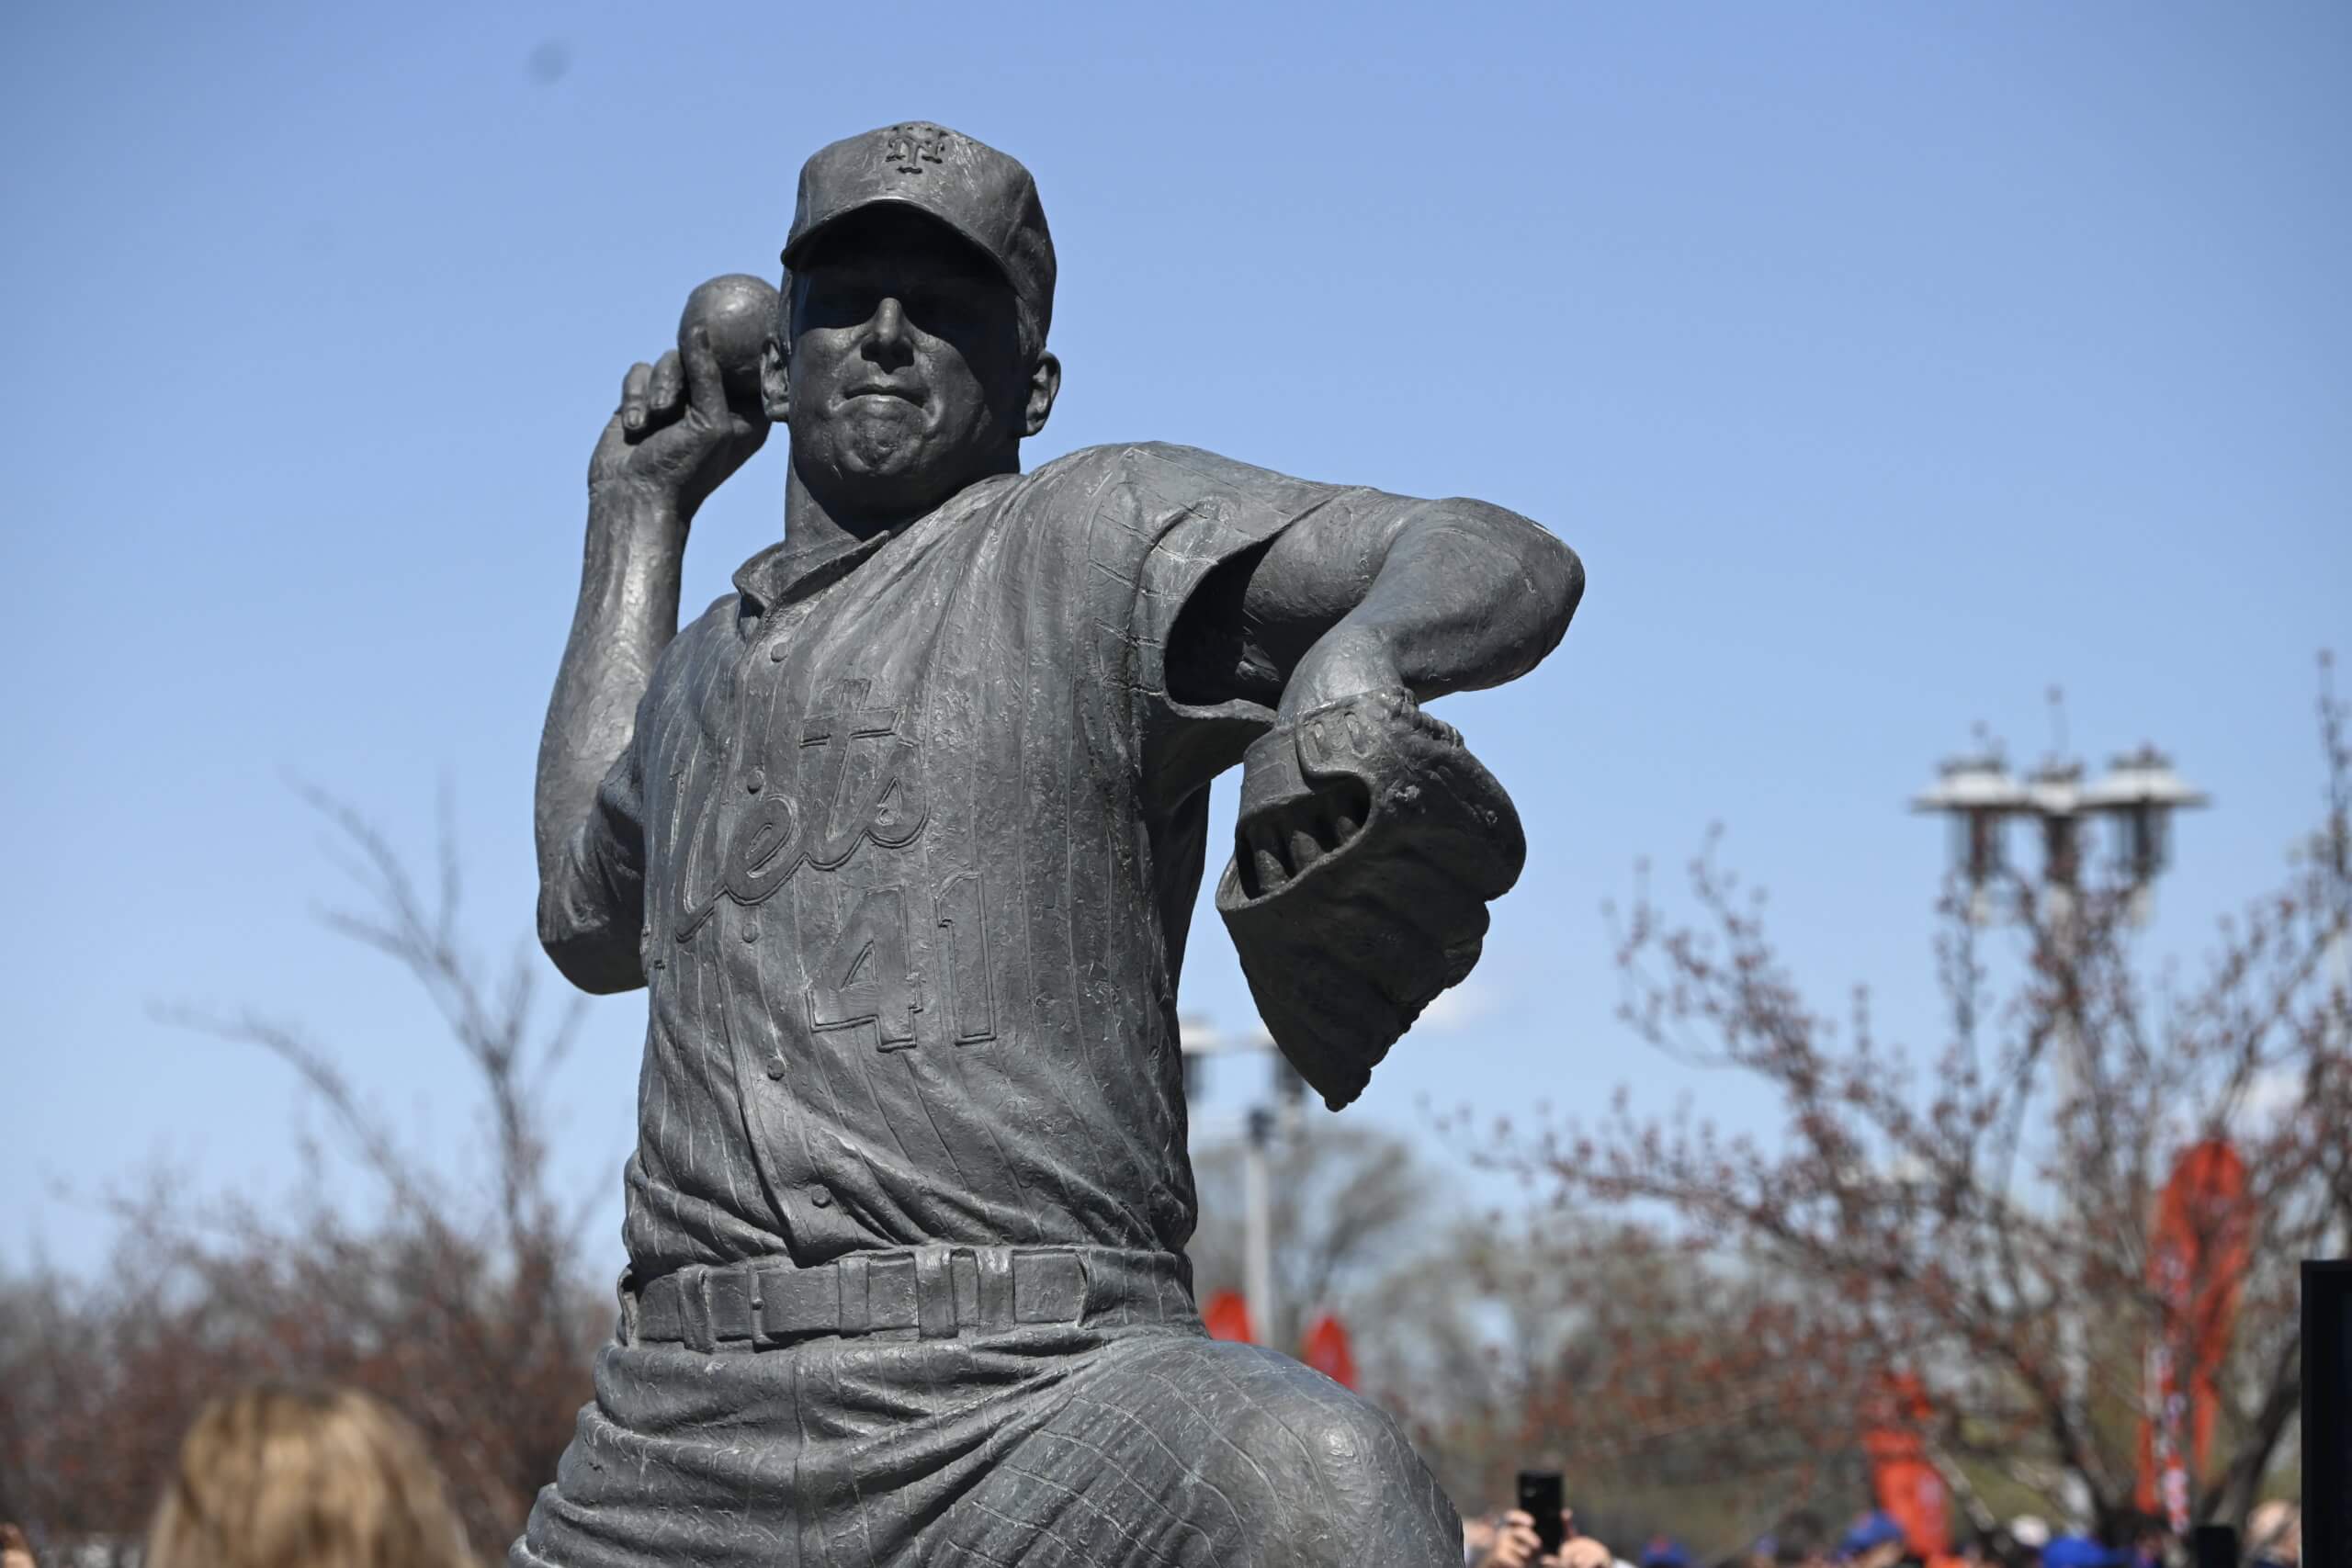 Tom Seaver's wife enraged at Mets for not building statue at Citi